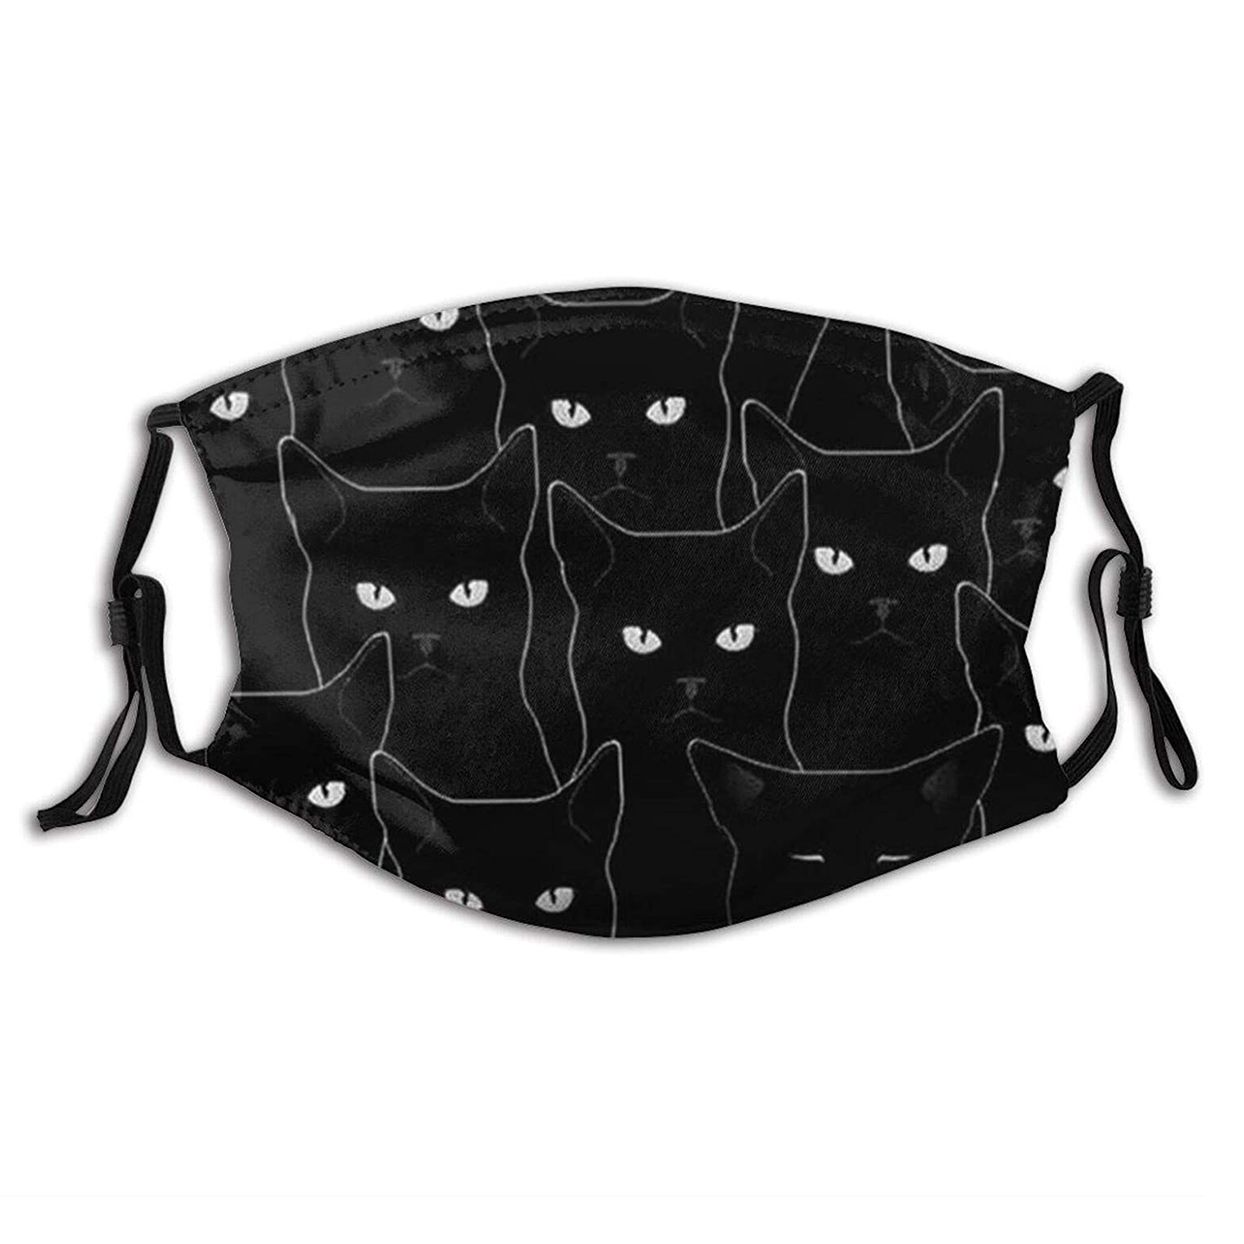 Product photo of a Black Cat Face Mask With Filter Pocket on a white background